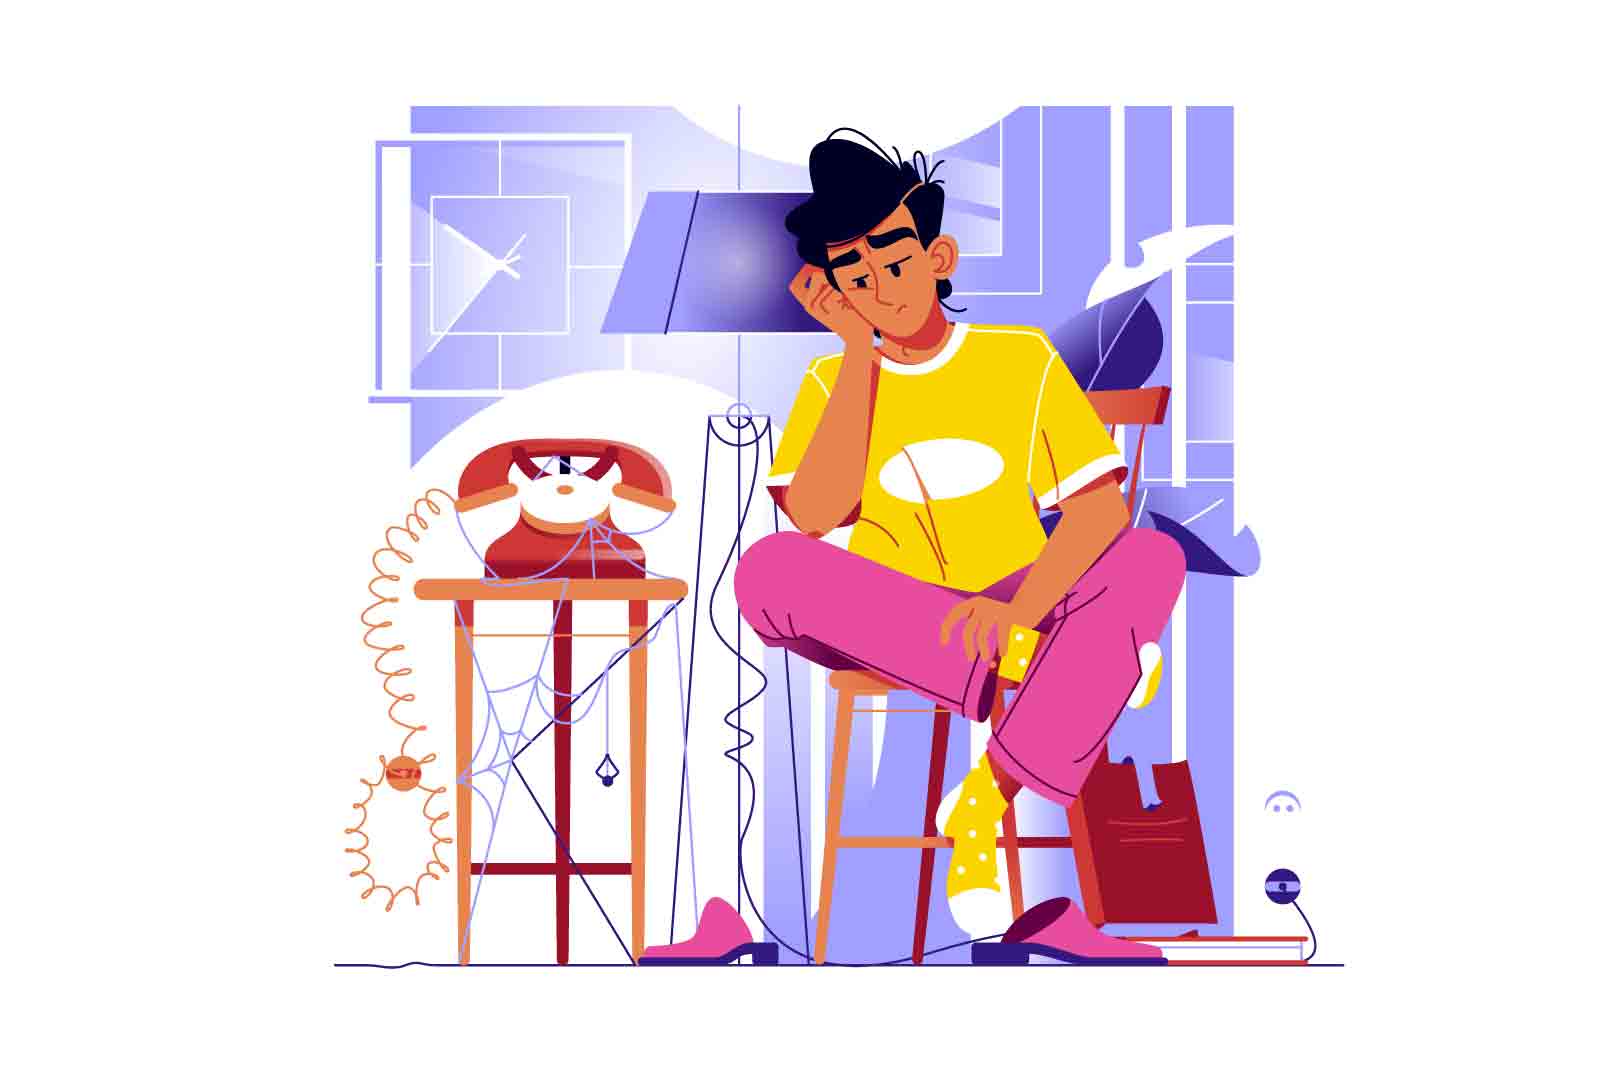 Guy waiting for phone call vector illustration. Upset and boring man sitting and looking at phone flat style concept